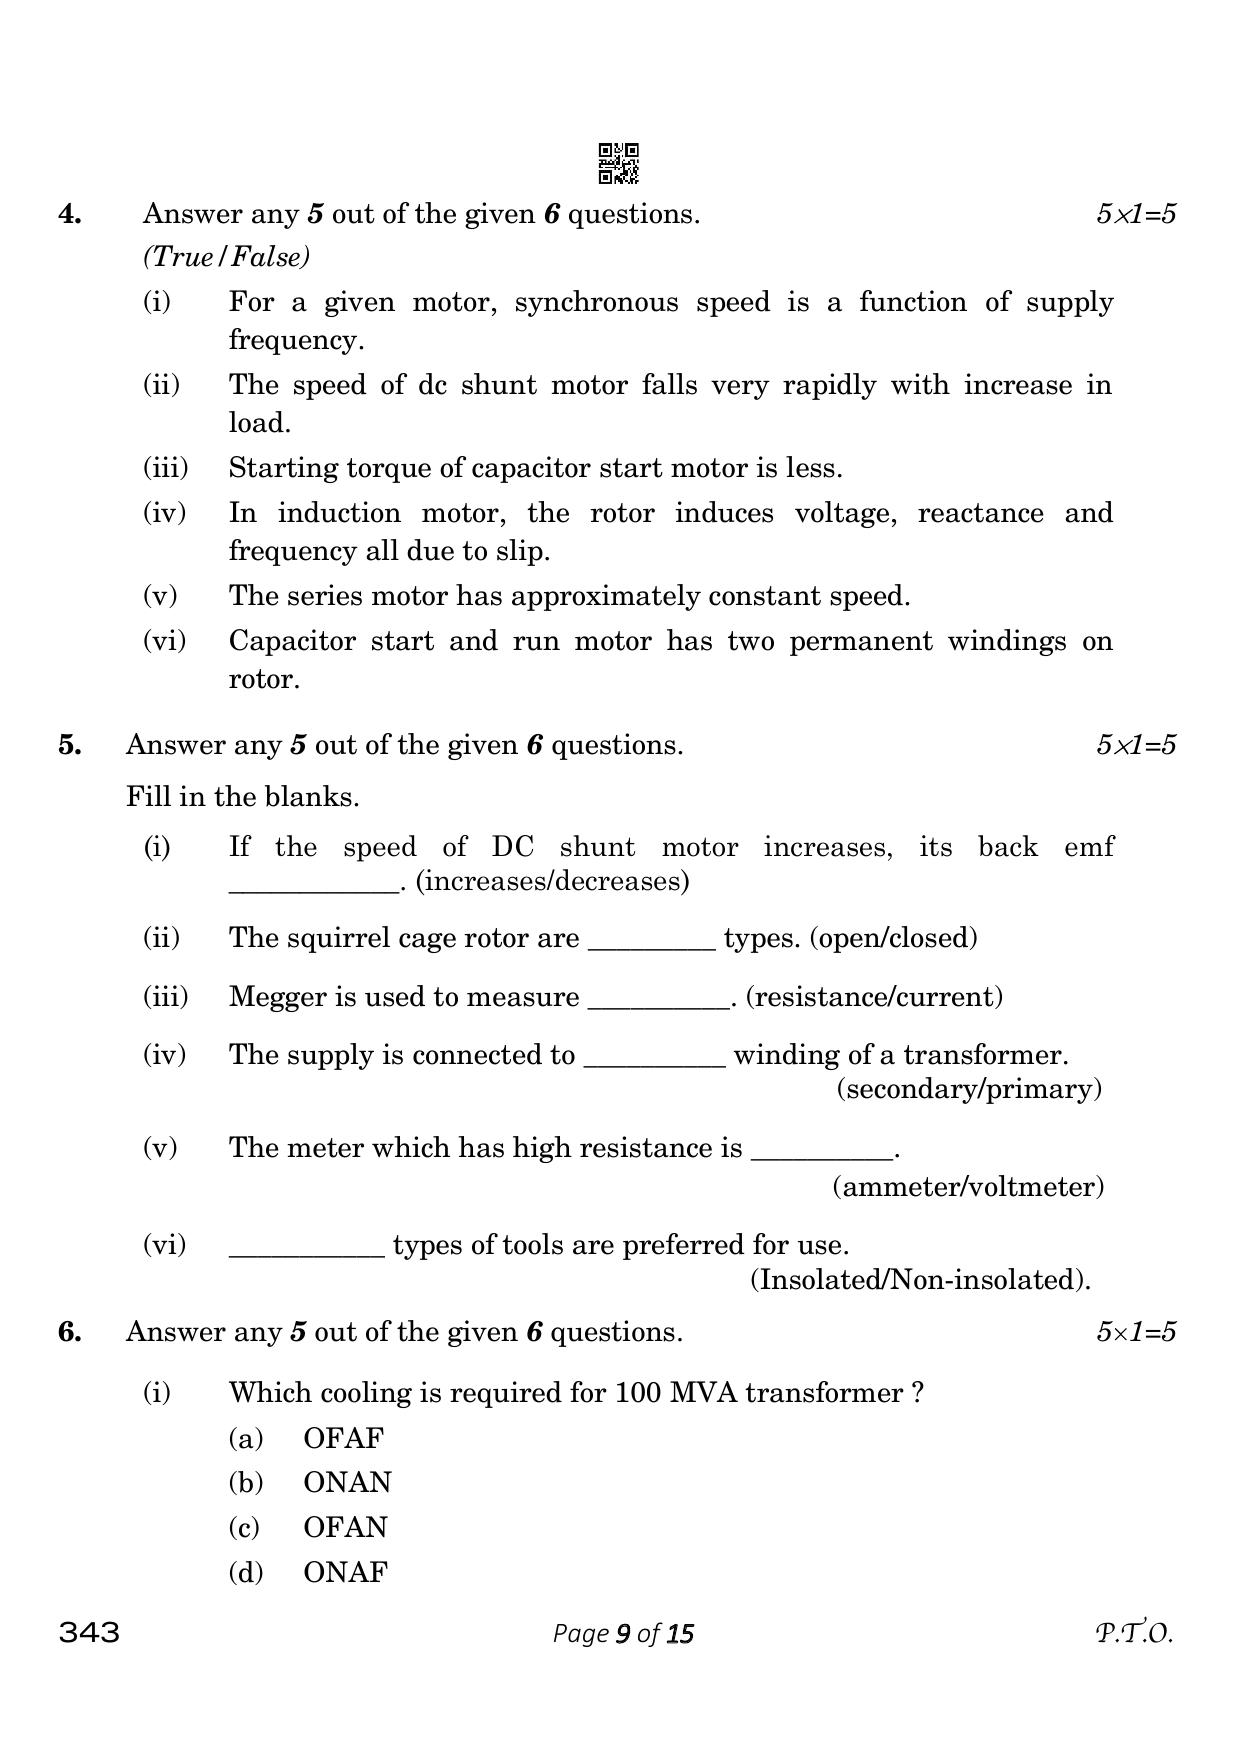 CBSE Class 12 343_Electrical Technology 2023 Question Paper - Page 9